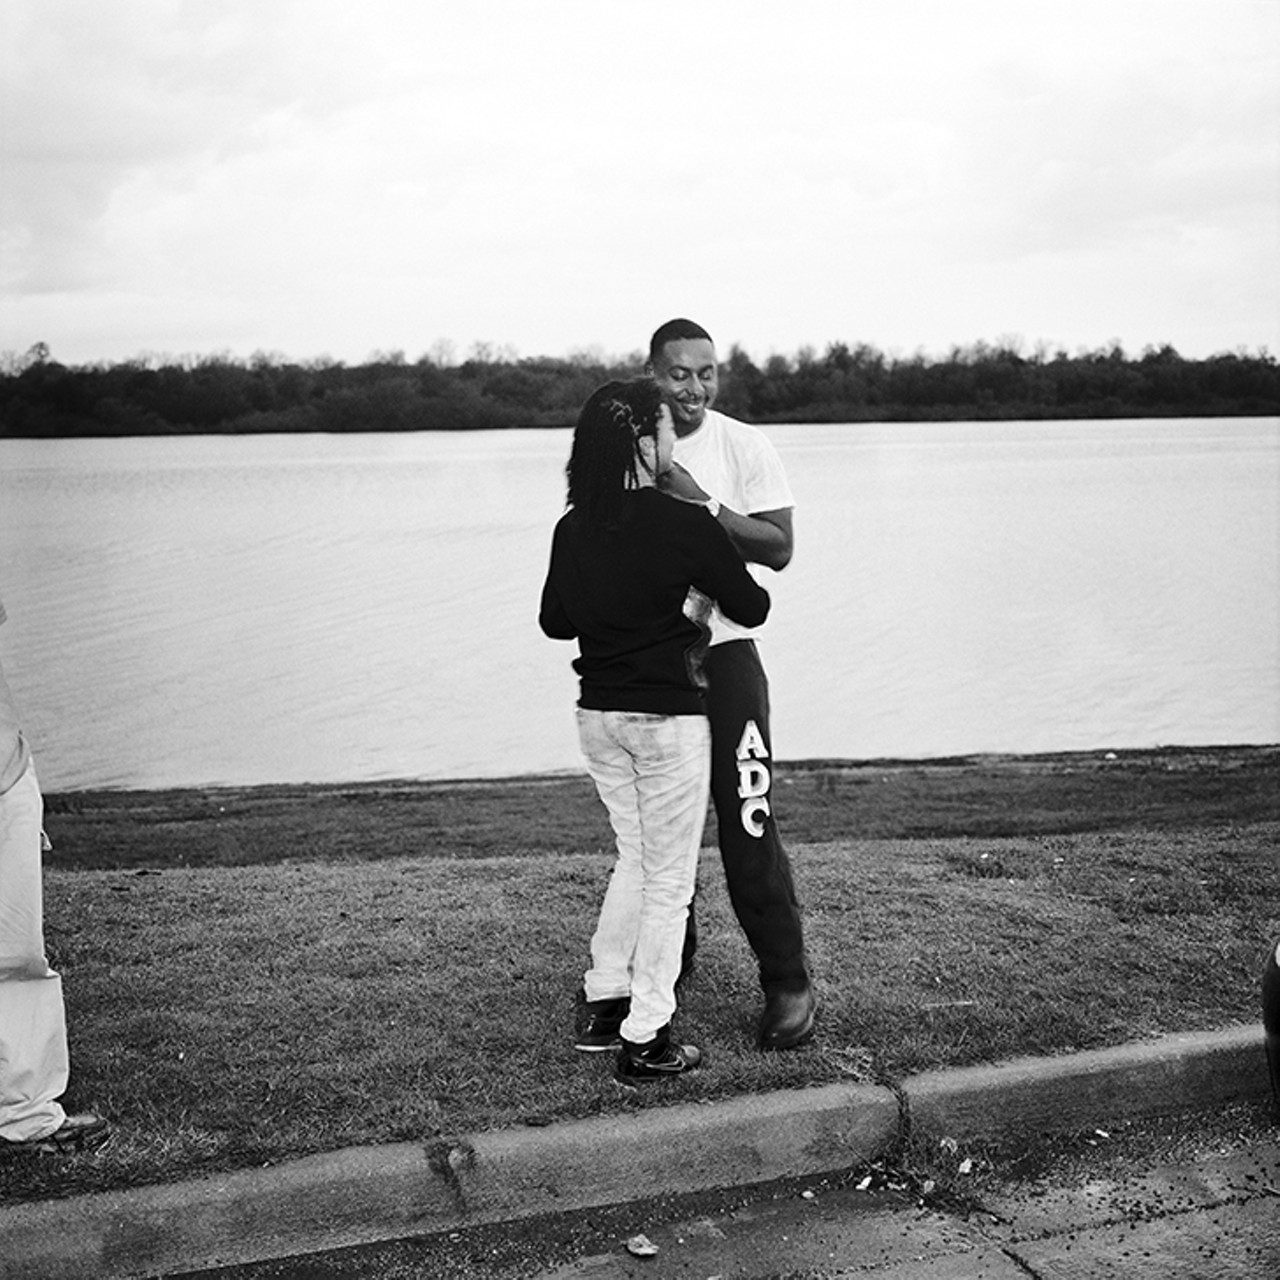 "Just before the artist&#146;s trip along the levees of the Mississippi, his father had traveled the river while at work on a container ship, unable to step onto land," a press release reads. "The photographer&#146;s journey became a metaphor for a difficult, often distant relationship with a father who was physically and emotionally out of reach."
Photo: Untitled inkjet print from The Levee // Gift of Sohrab Hura and Experimenter Gallery, Kolkata // &copy; Sohrab Hura